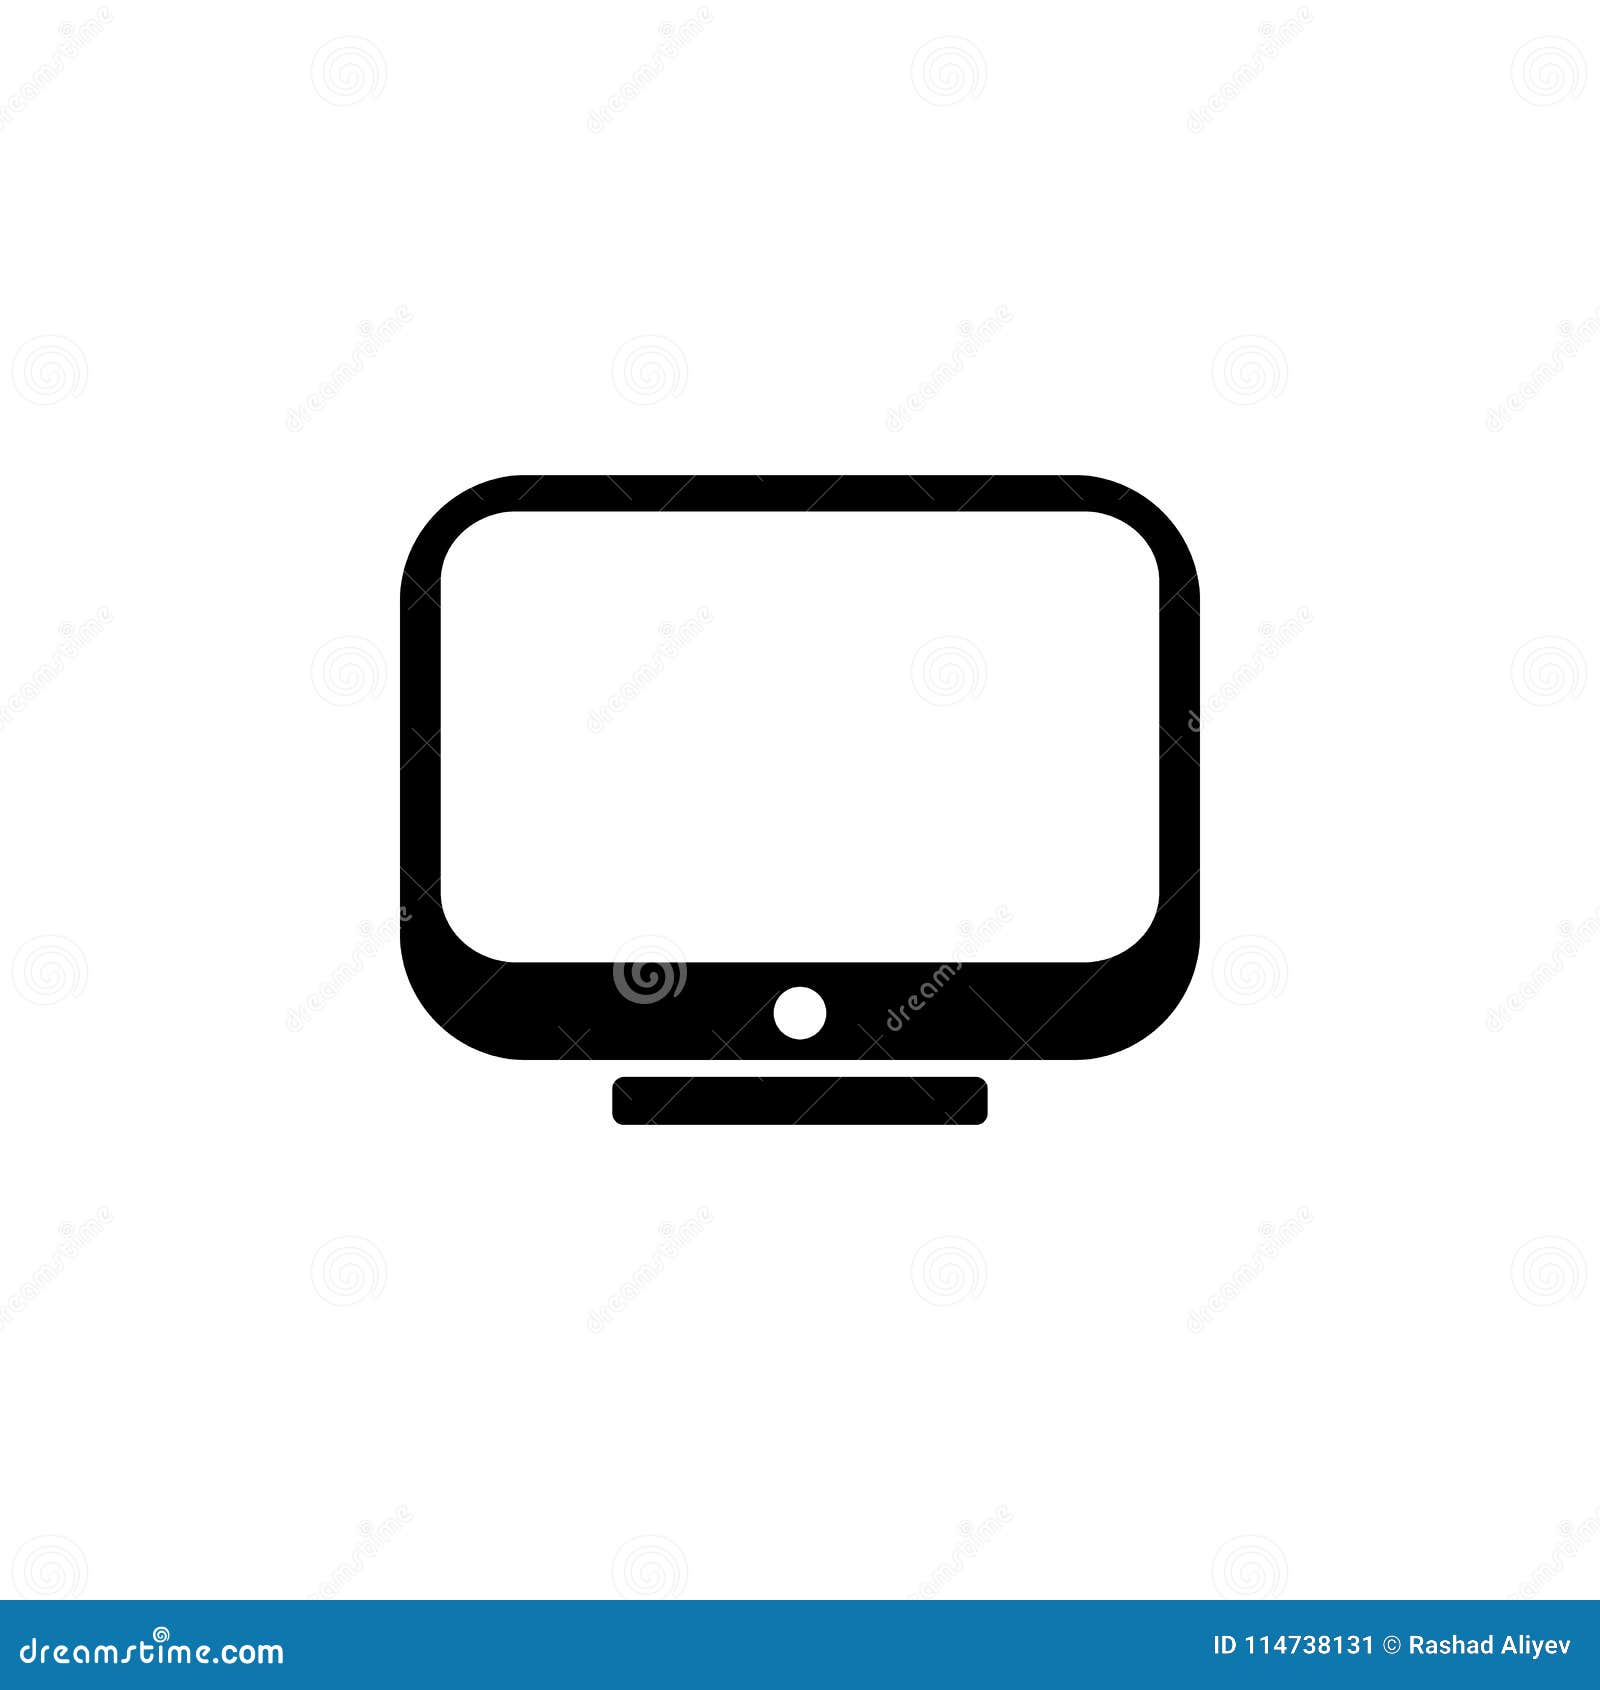 monitor icon.  of minimalistic icon for mobile concept and web apps. signs and s collection icon for websites, web de